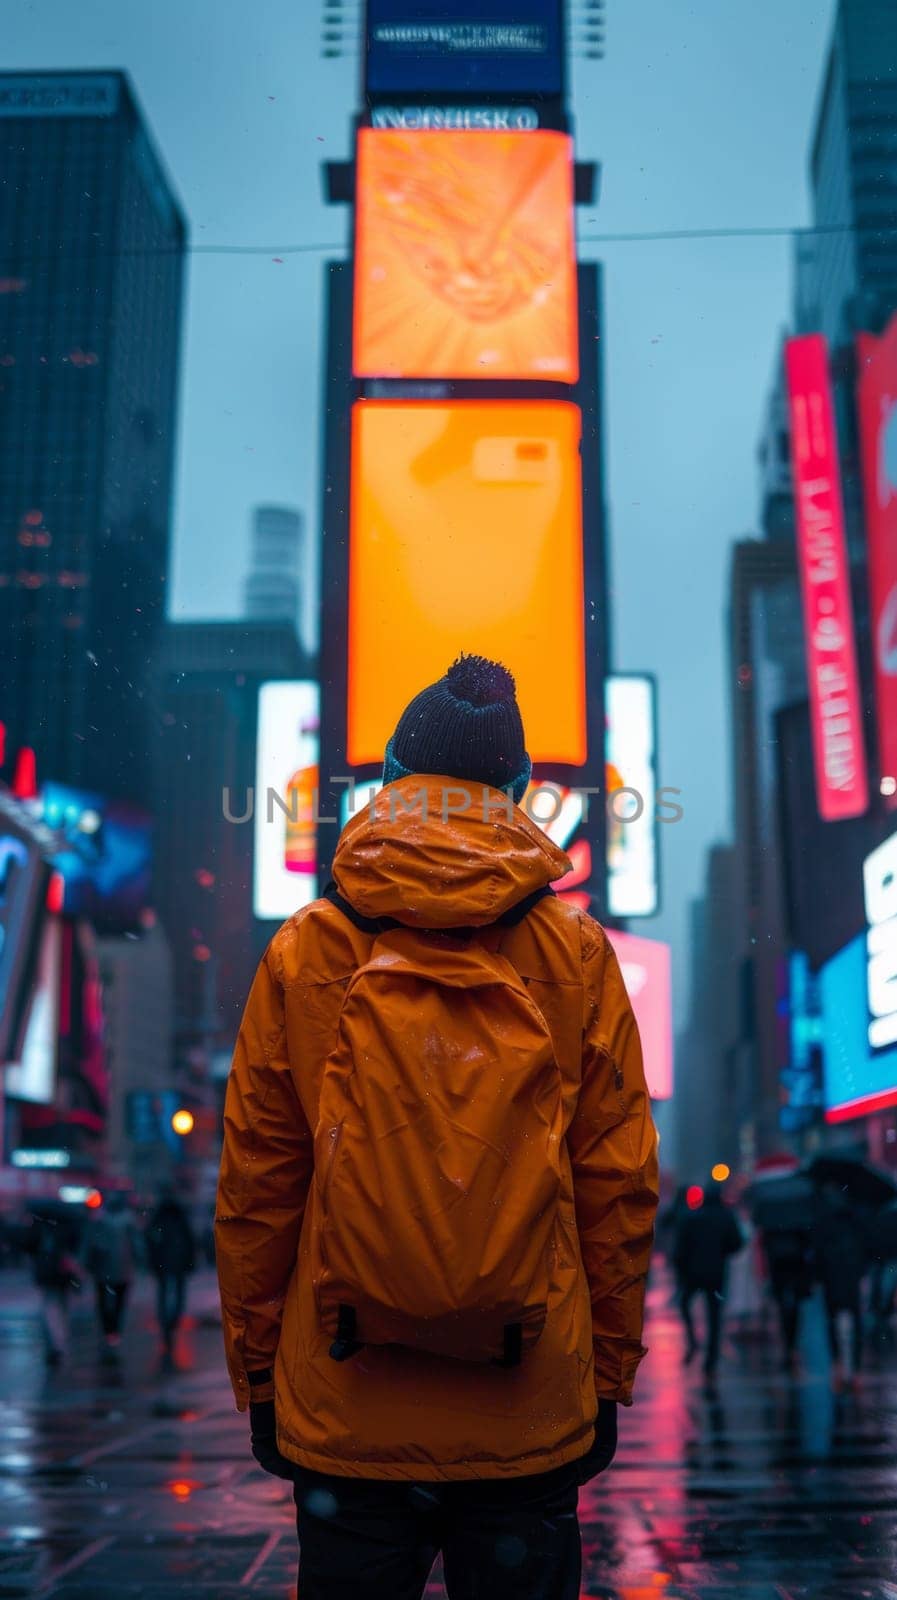 A person in an orange jacket standing on a street with neon signs, AI by starush